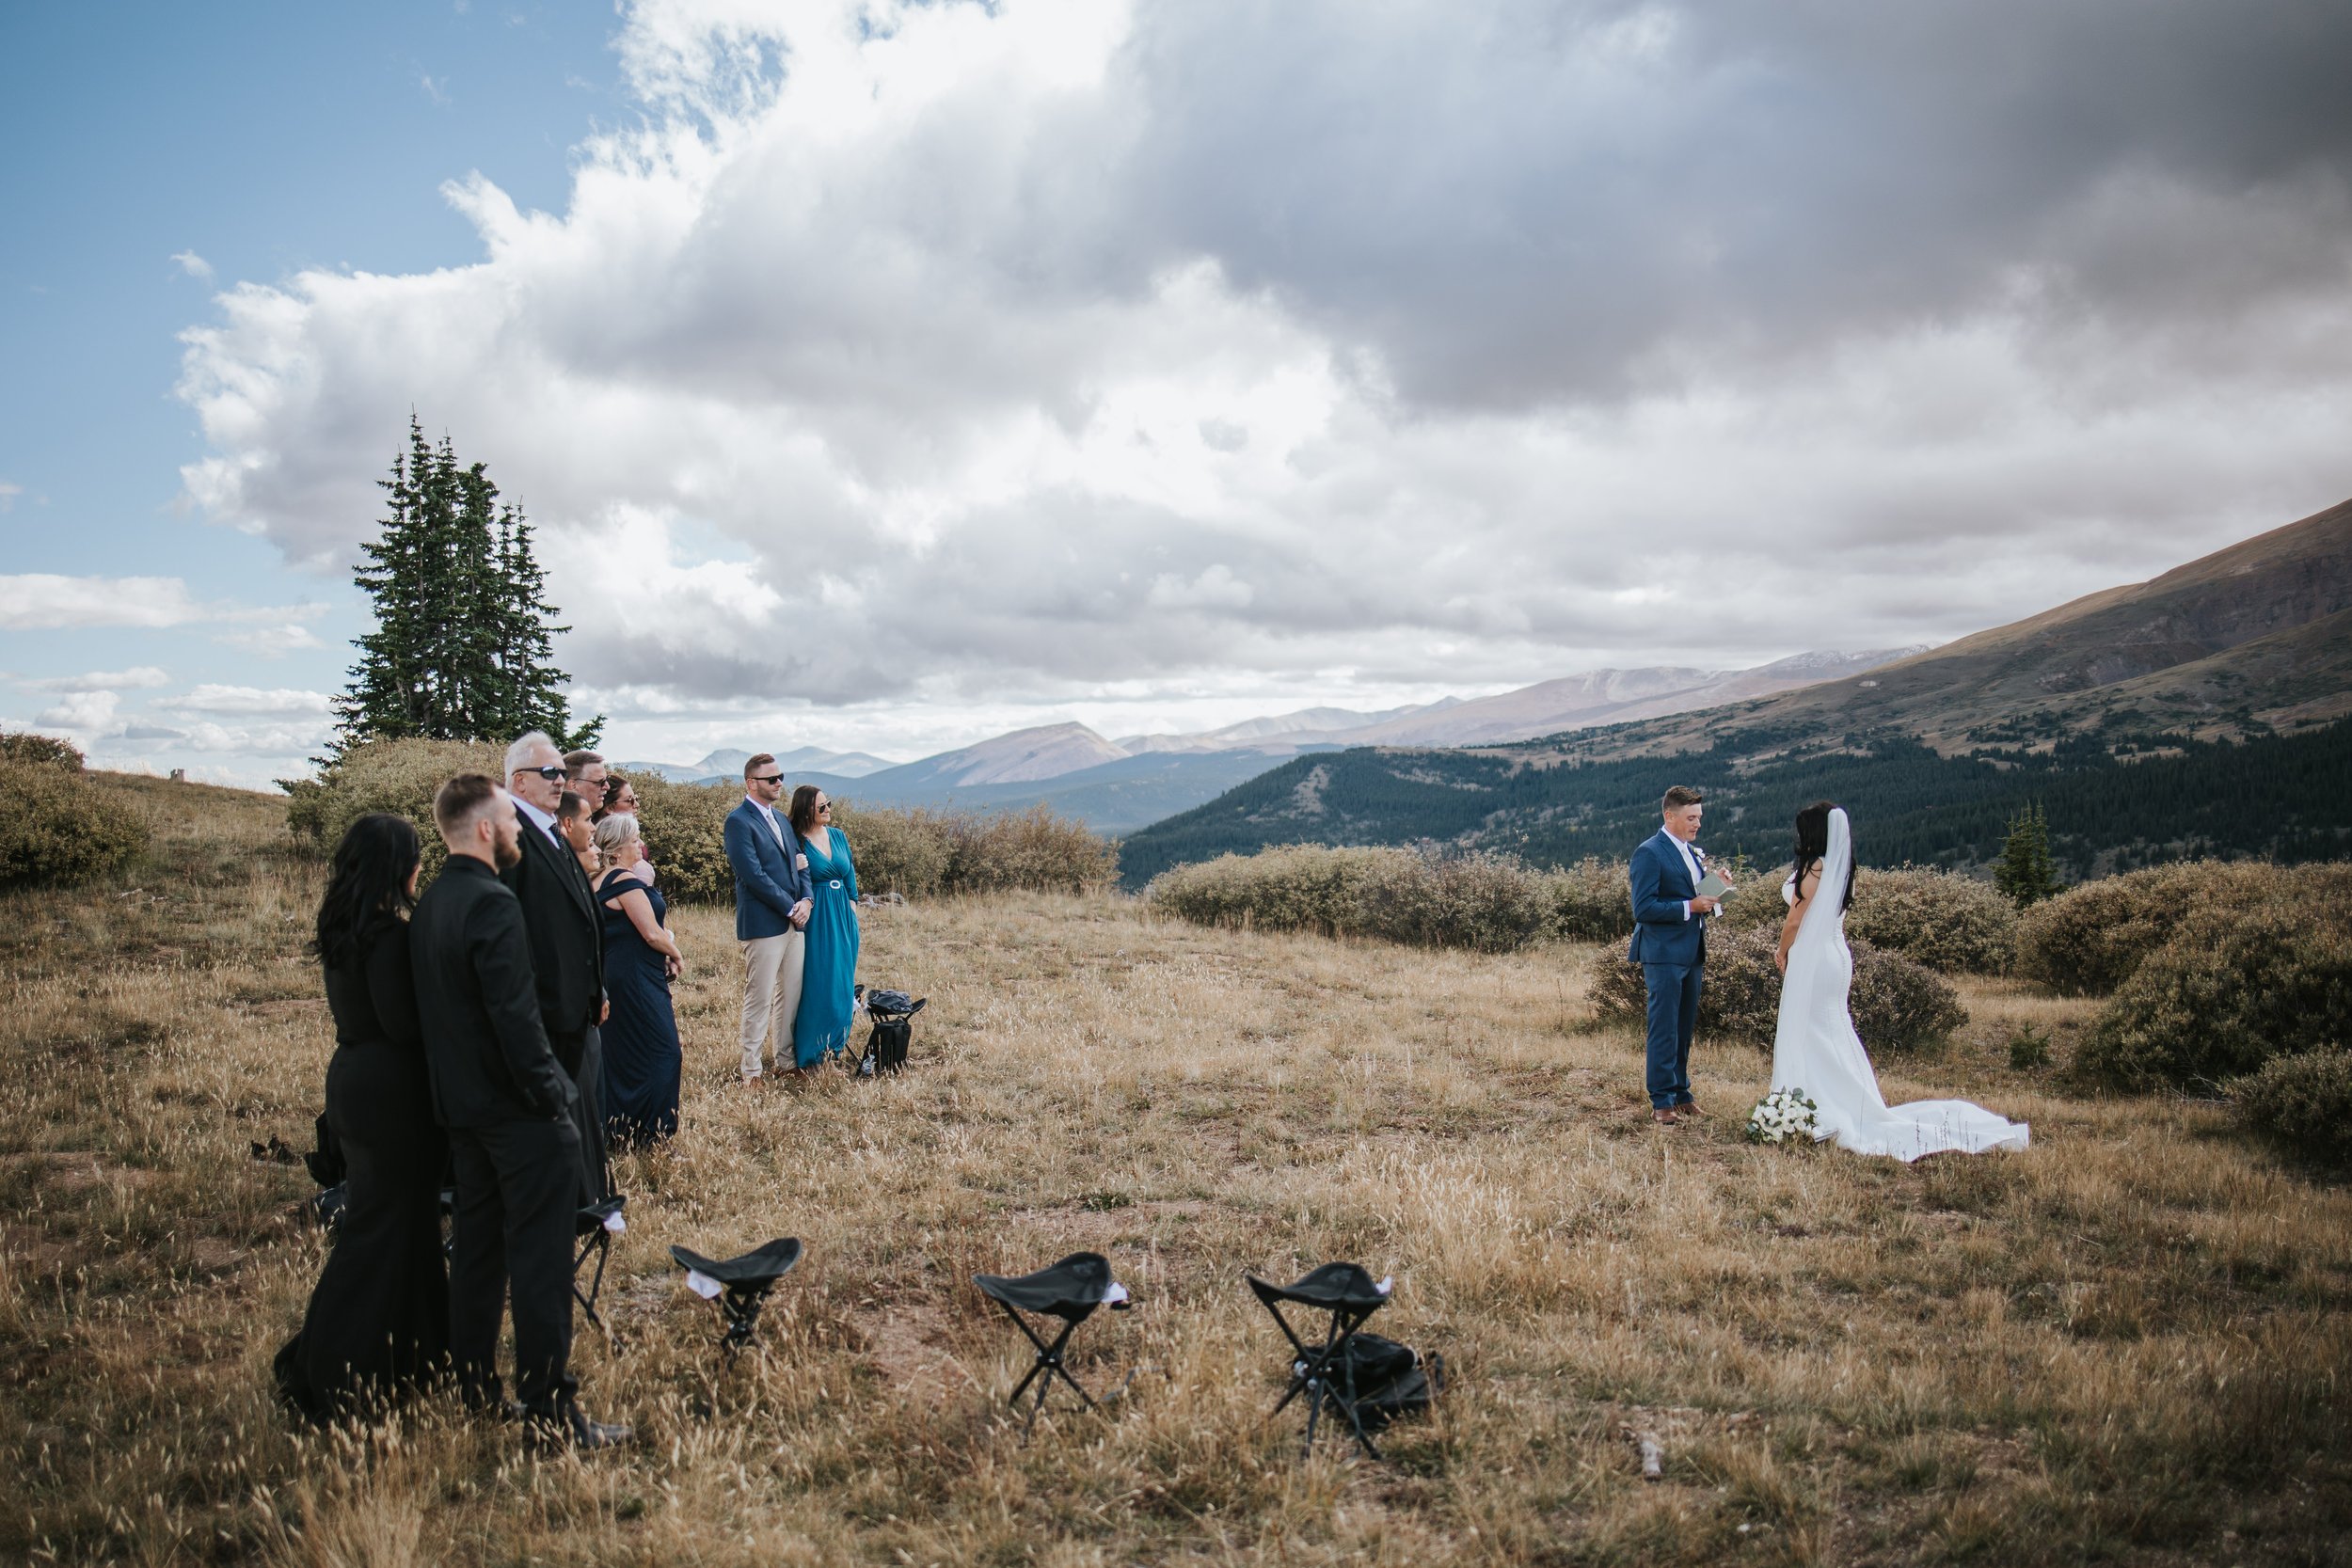 Micro wedding ceremony on top of a mountain in Colorado.